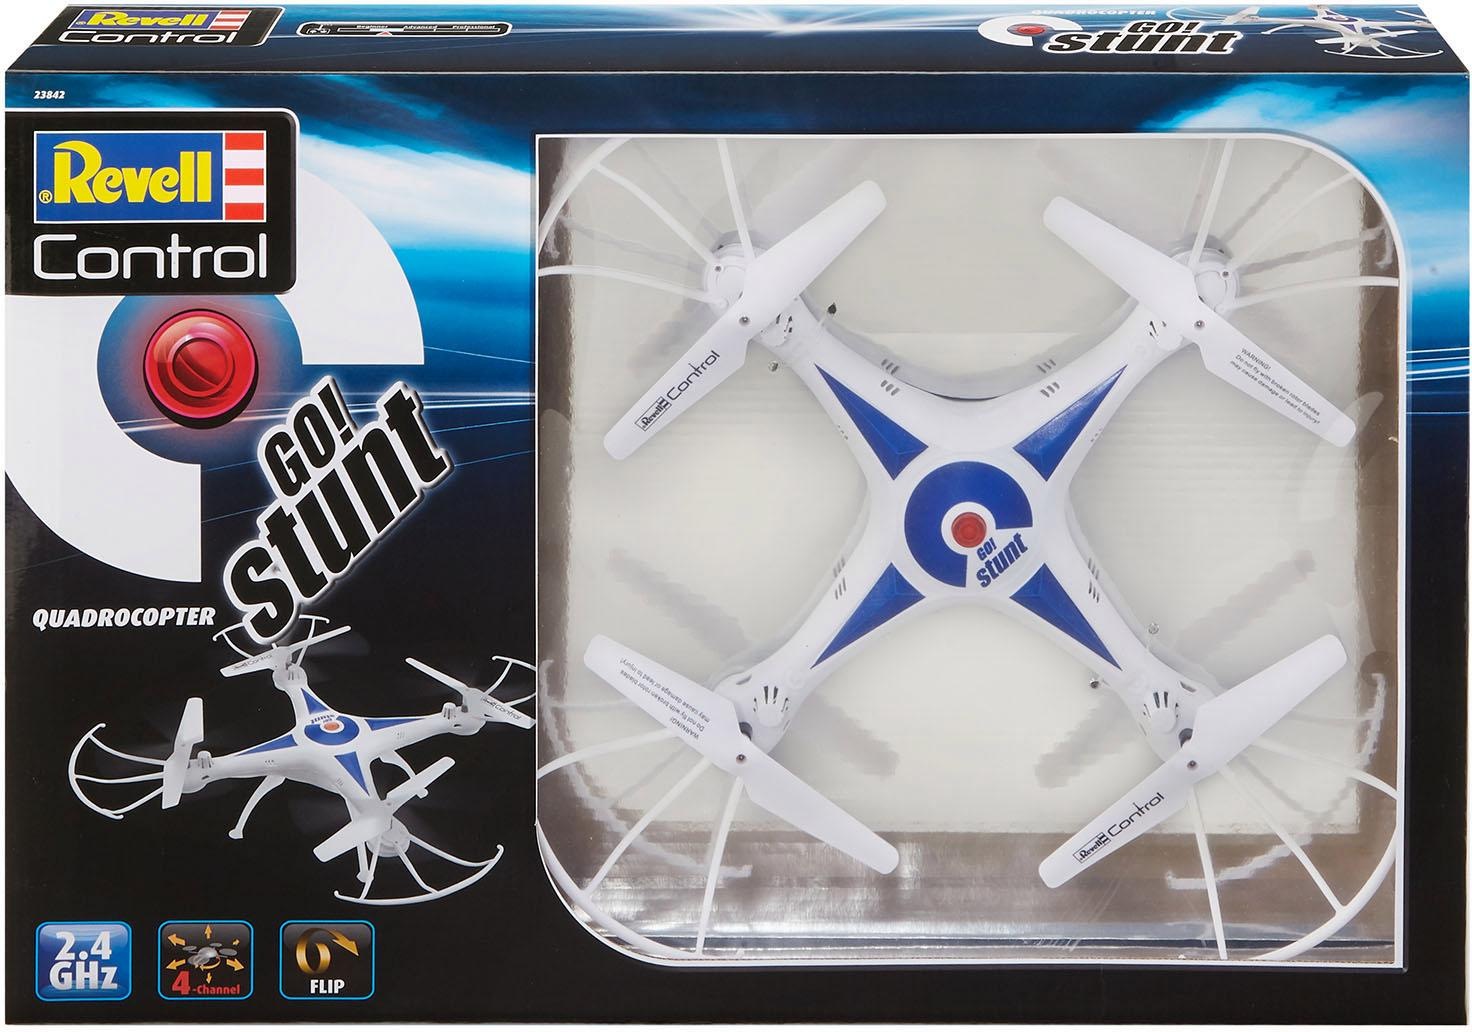 RC-Quadrocopter »Revell® control, GO! Stunt«, mit LED-Beleuchtung